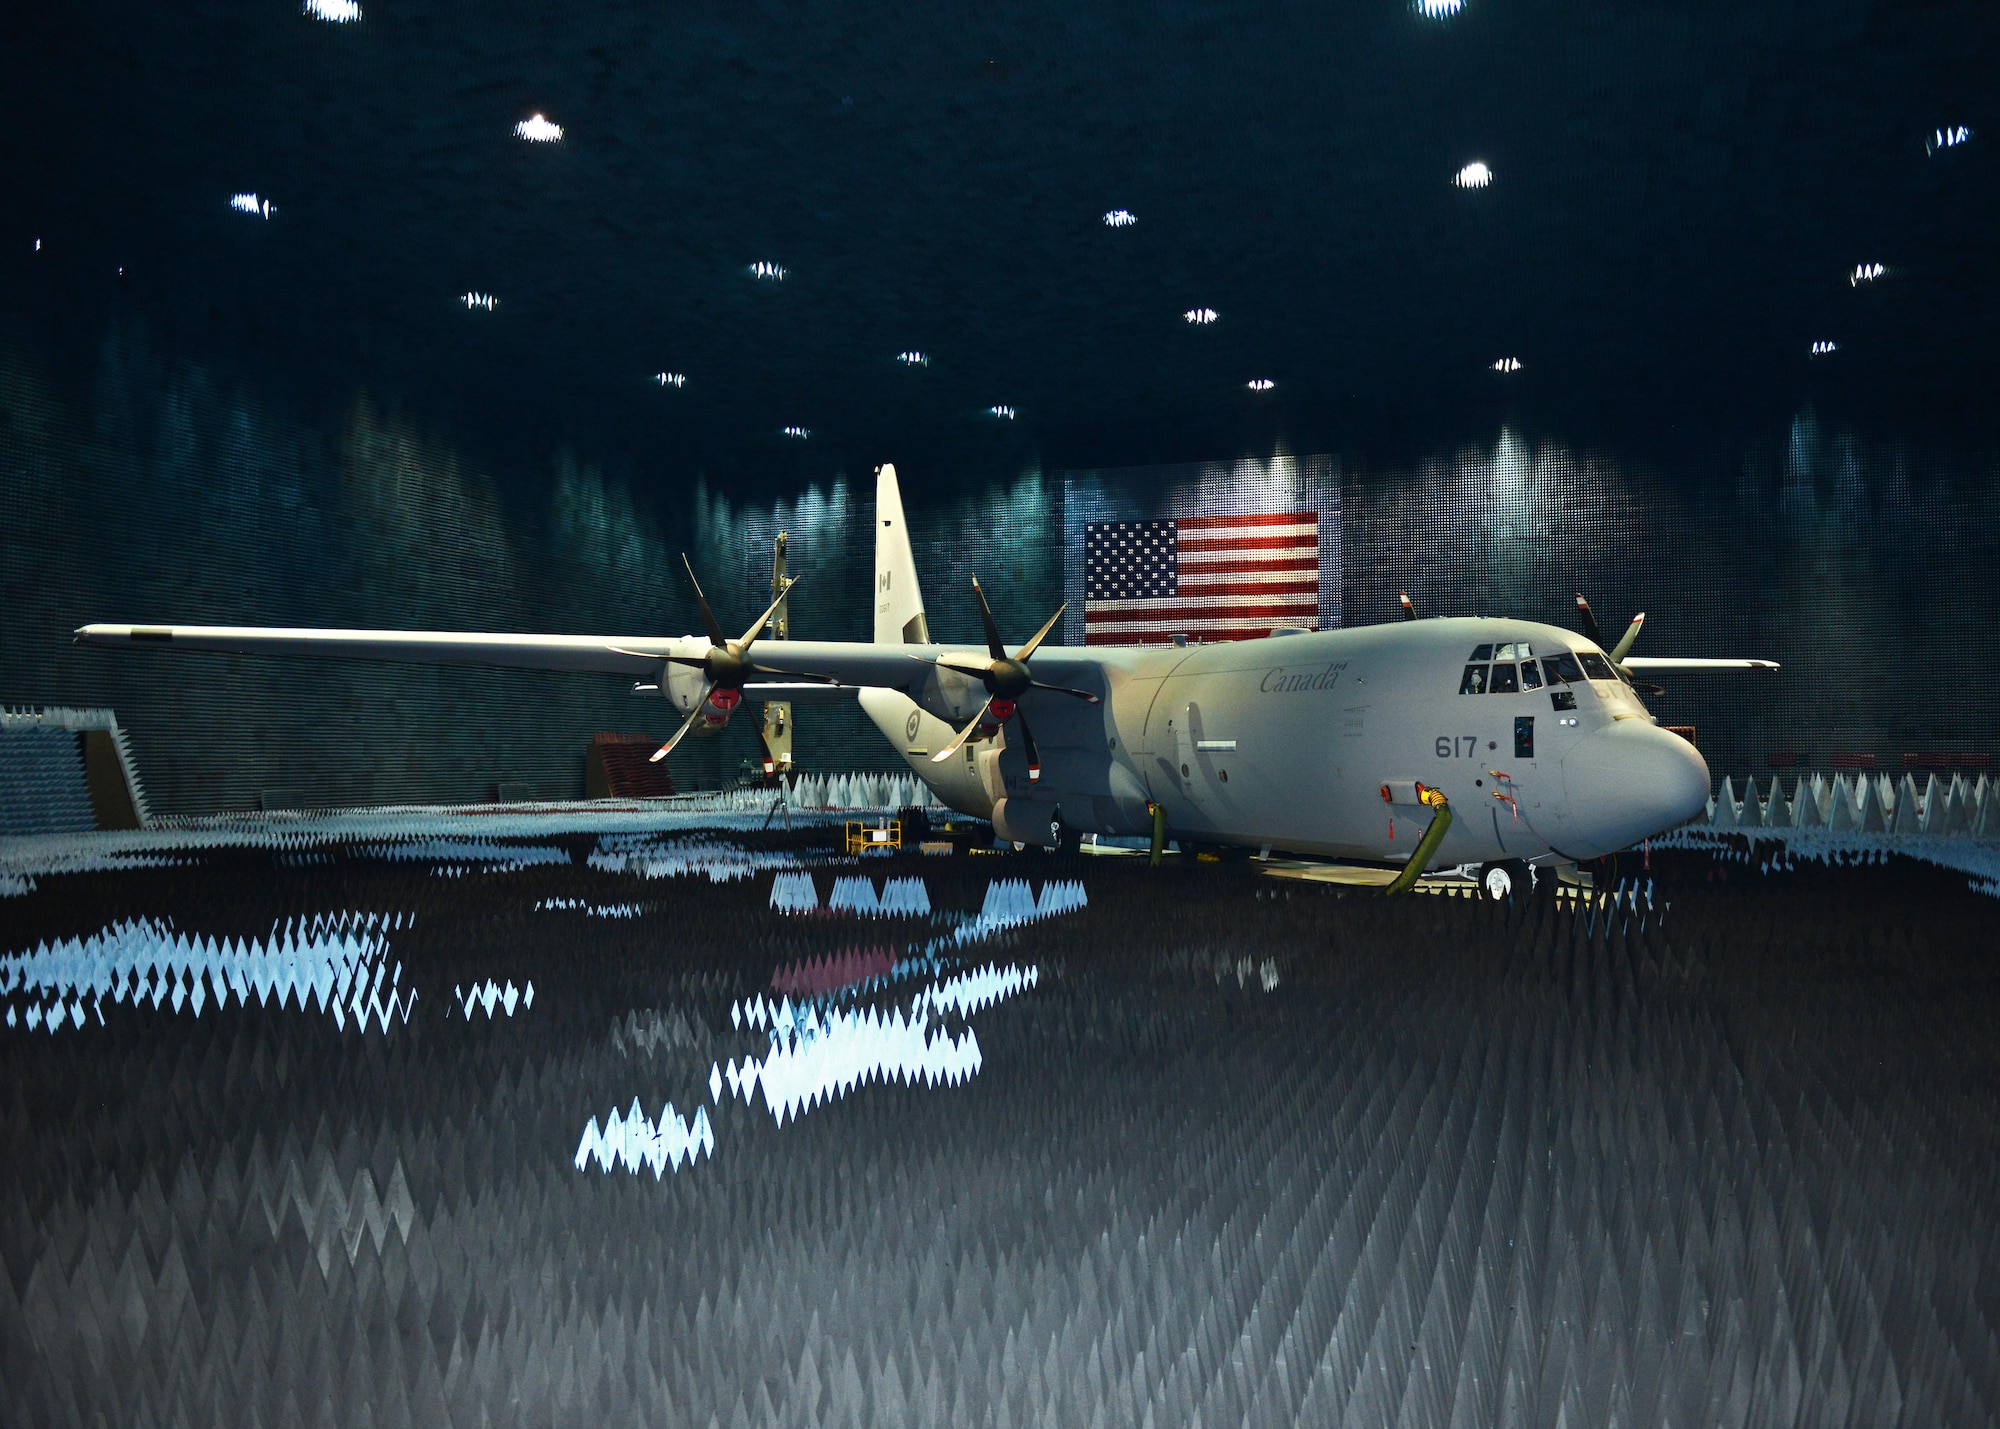 A Royal Canadian Air Force CC-130J tactical airlift aircraft sits in the Benefield Anechoic Facility on Edwards Air Force Base, Calif., undergoing electronic warfare testing. Canada purchased 17 CC-130Js with the last one delivered in 2012. The RCAF CC-130J fleet is currently going through a block 7 upgrade to the aircraft avionics (U.S. Air Force photo/Kenji Thuloweit) 